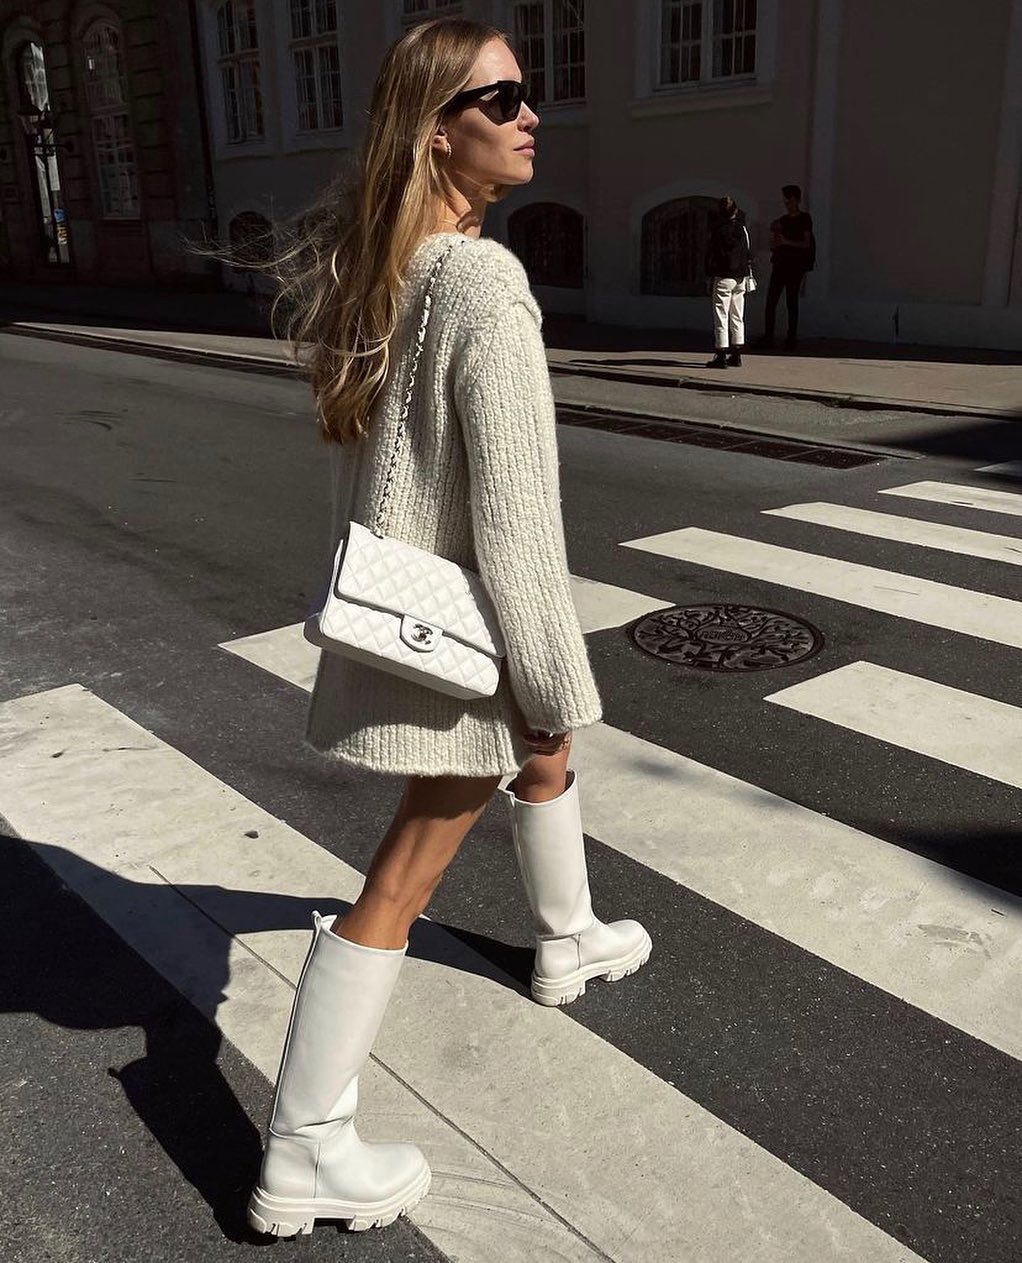 15 Chunky, Knee-High Boots That Are On-Trend This Season | Who What Wear